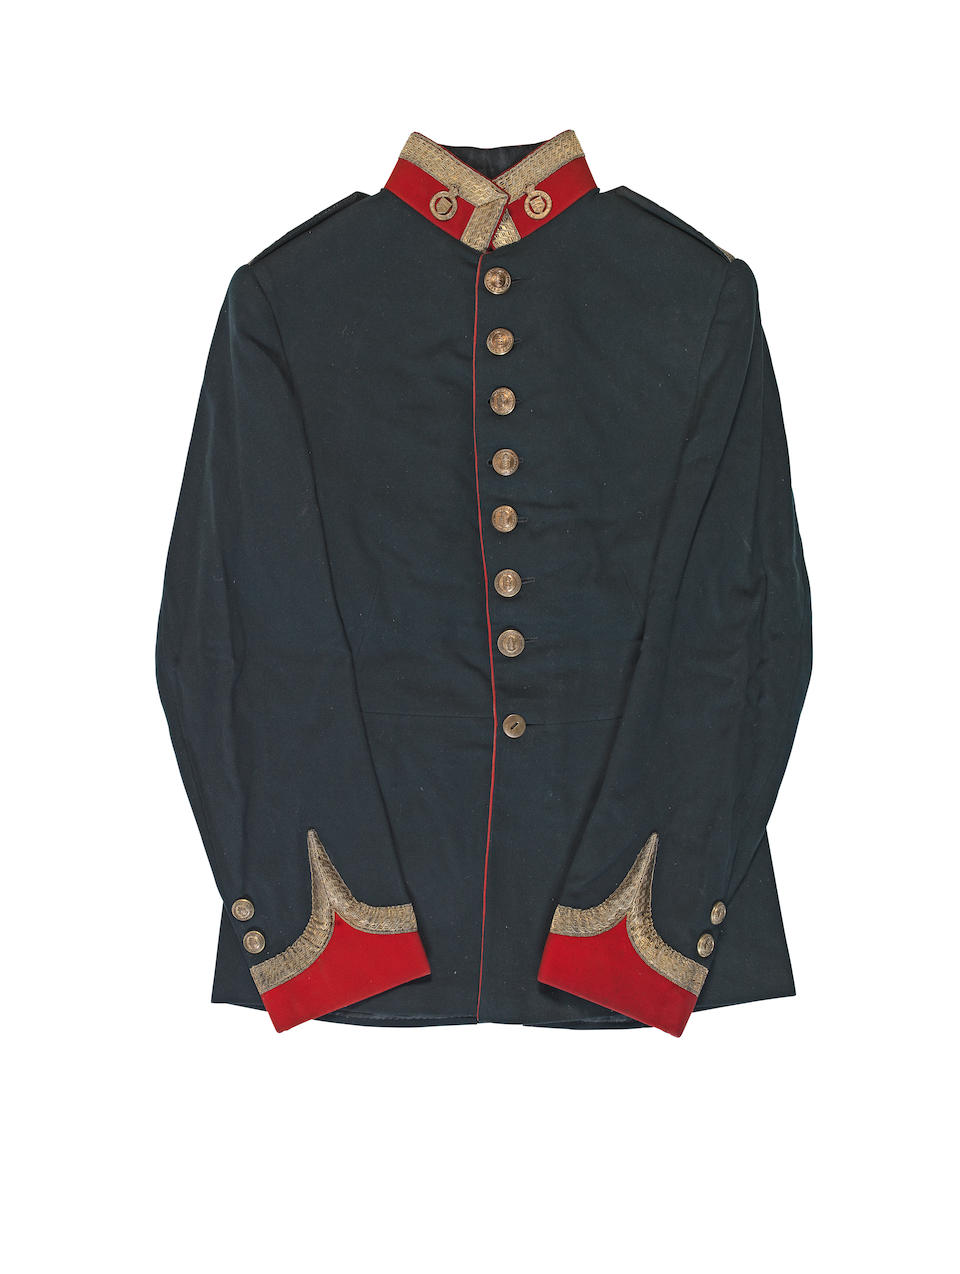 A 2nd Lieutenant's Full Dress Tunic Of The Essex Imperial Yeomanry